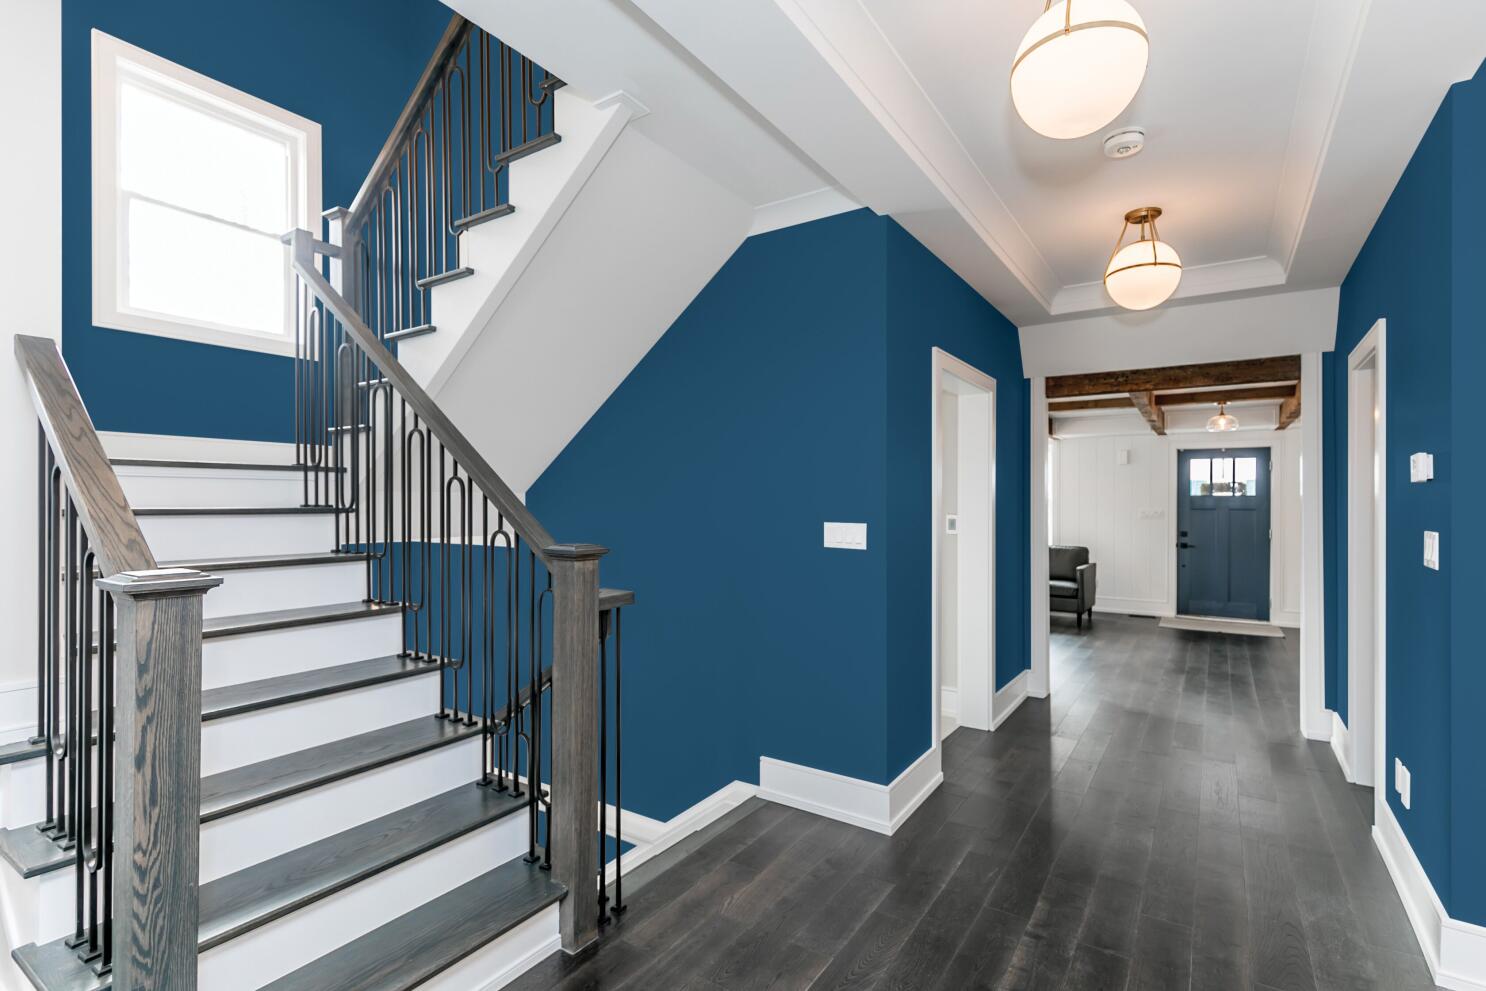 This Popular Blue Paint Is Great For Rooms With Natural Light - Paintzen